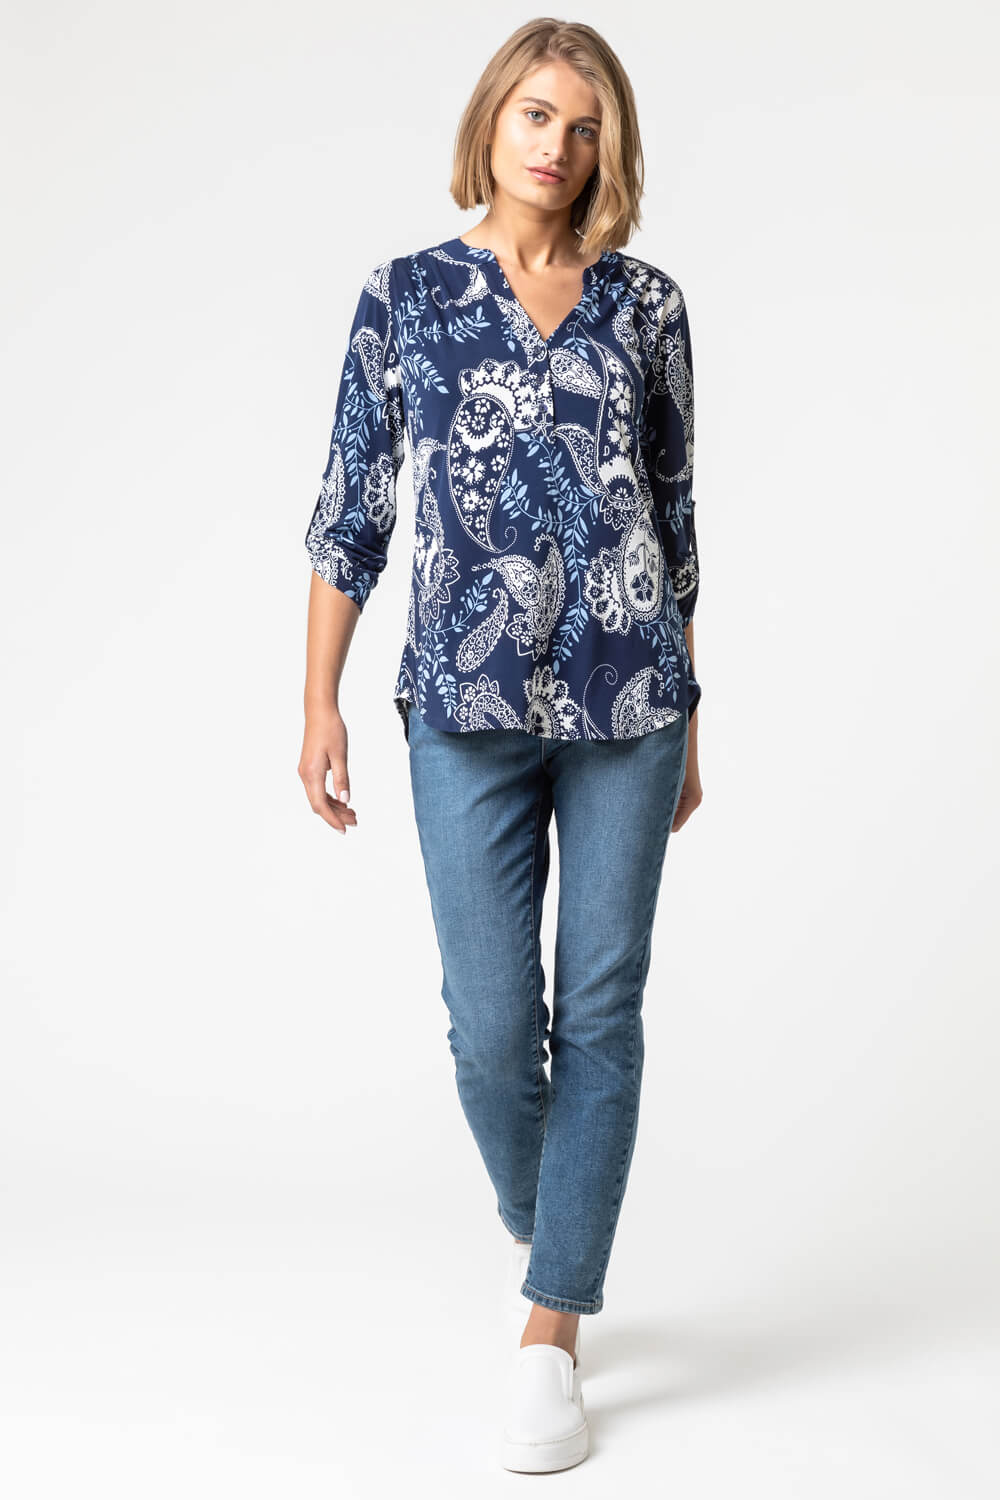 Blue Paisley Puff Print Notch Neck Top, Image 3 of 4